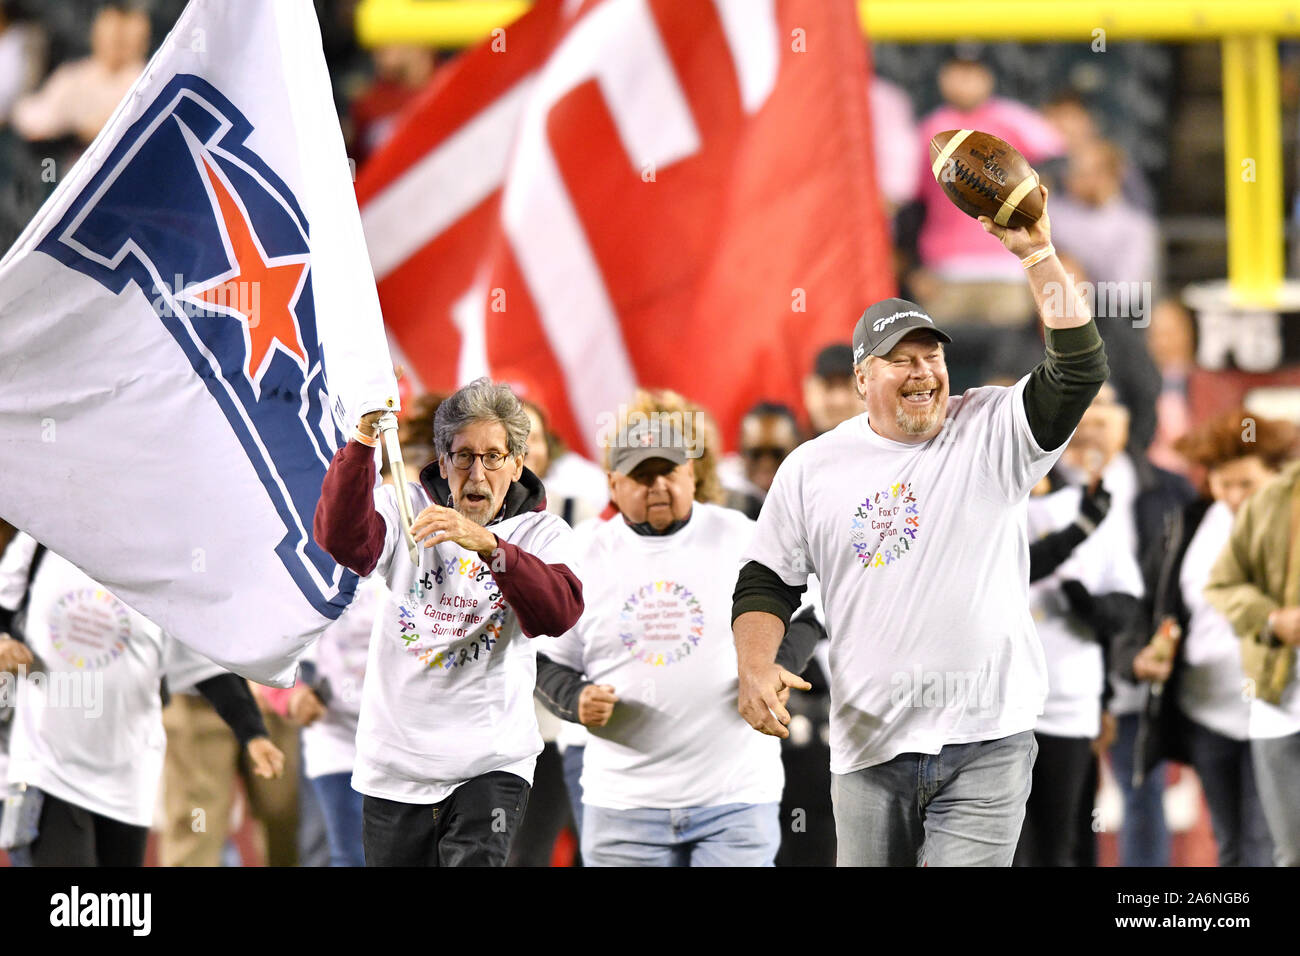 Philadelphia, Pennsylvania, USA. 26th Oct, 2019. Cancer survivors carry the American Athletic Conference flag onto the field prior to the football game played at Lincoln Financial Field in Philadelphia. UCF beat Temple 63-21. Credit: Ken Inness/ZUMA Wire/Alamy Live News Stock Photo